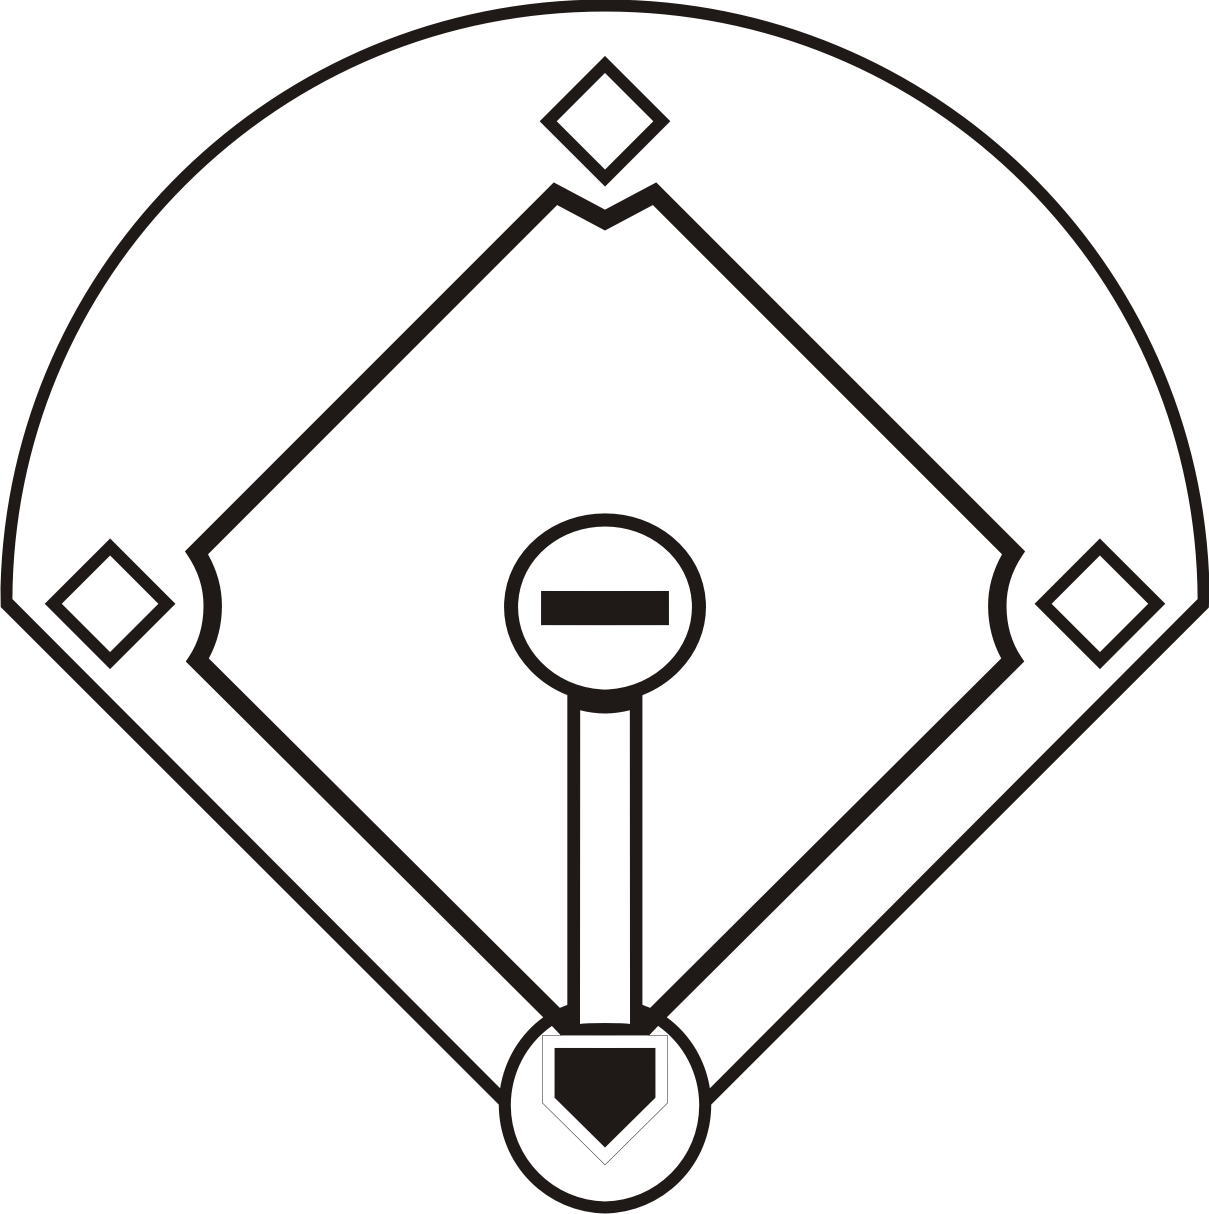 Baseball Diamond Coloring Pages - High Quality Coloring Pages